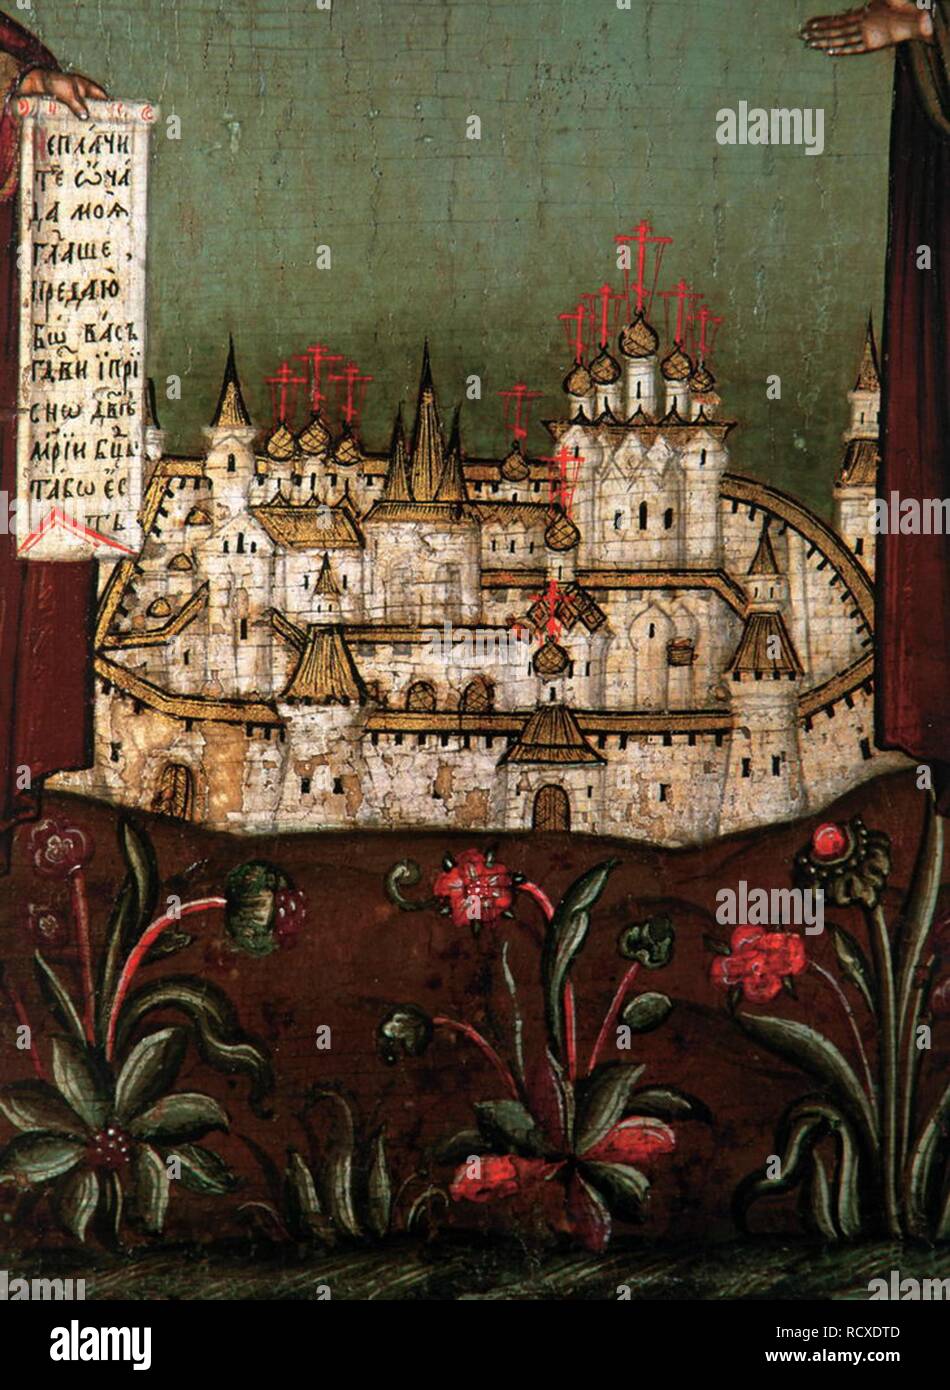 The Solovetsky Monastery (Detail). Museum: State Museum of Architecture, History and Art, Vladimir. Author: Russian icon. Stock Photo